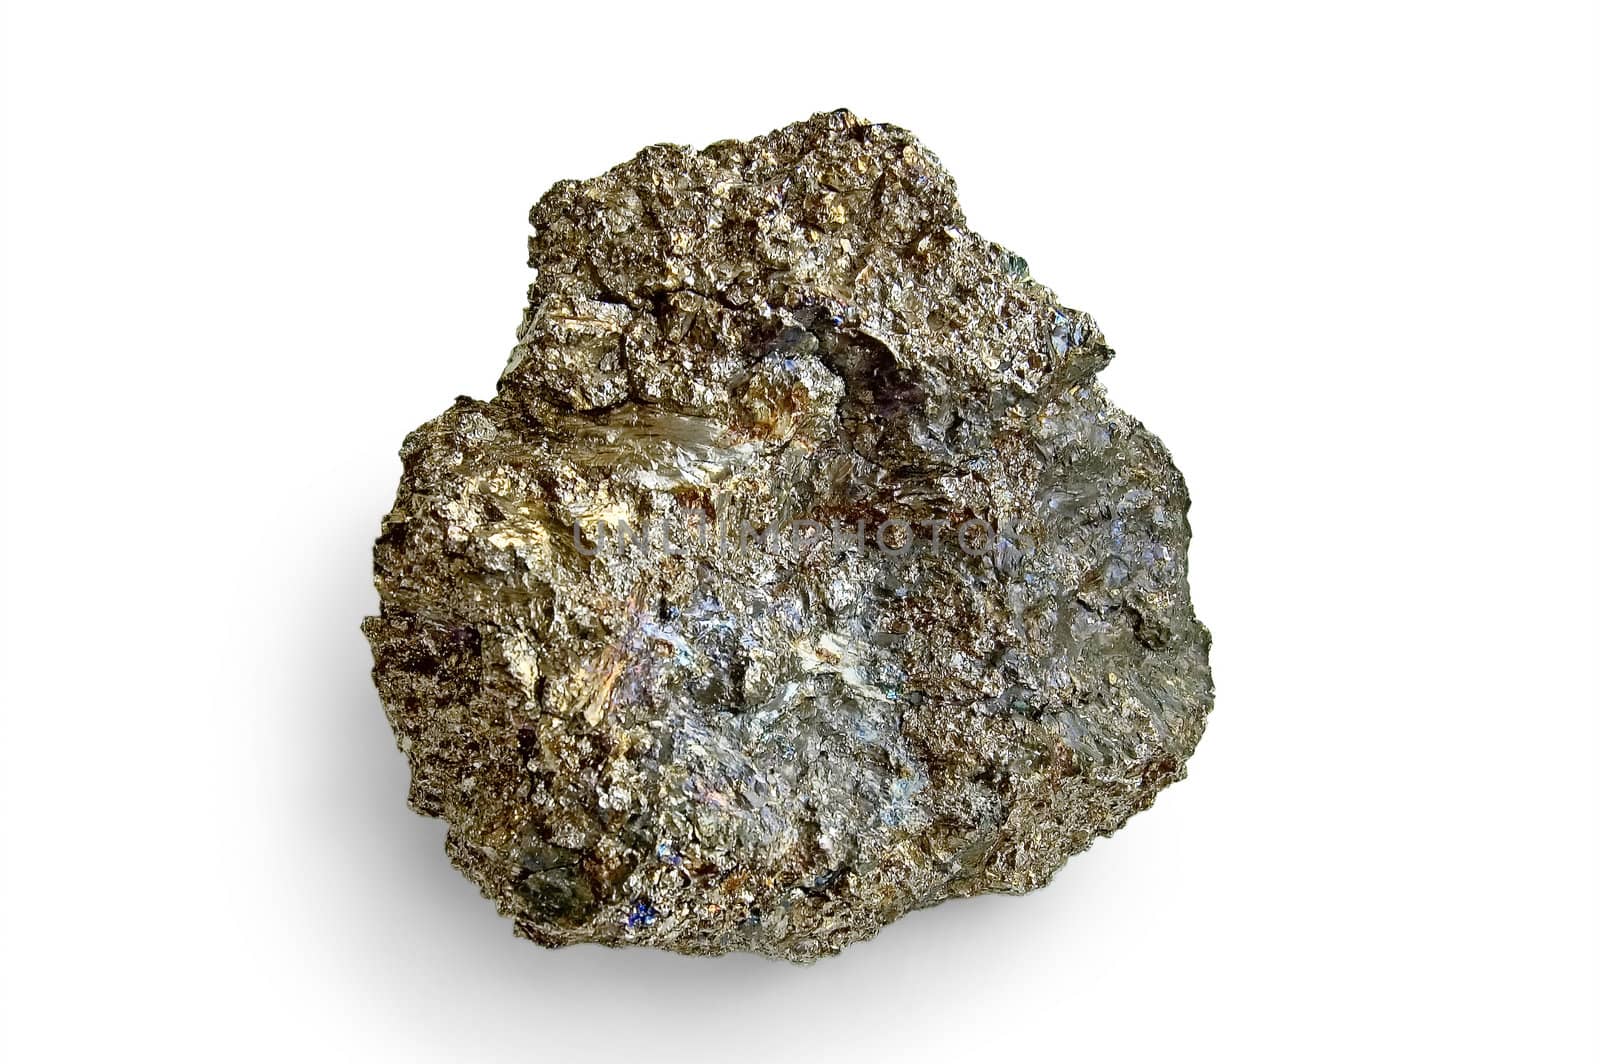 A piece of ferroalloy in isolation on a white background